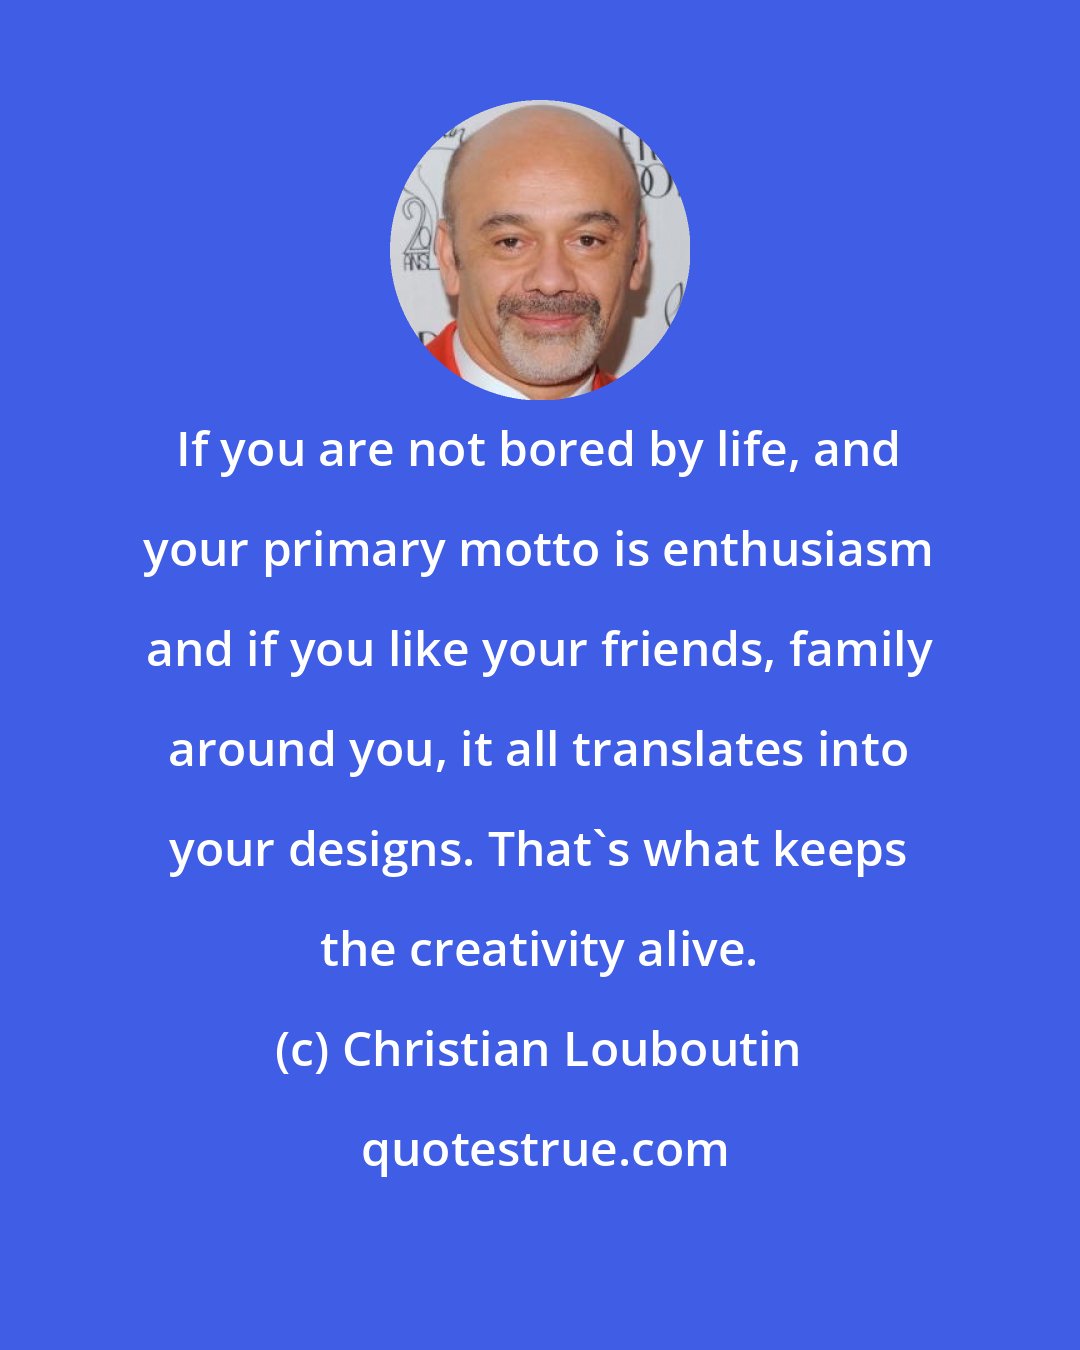 Christian Louboutin: If you are not bored by life, and your primary motto is enthusiasm and if you like your friends, family around you, it all translates into your designs. That's what keeps the creativity alive.